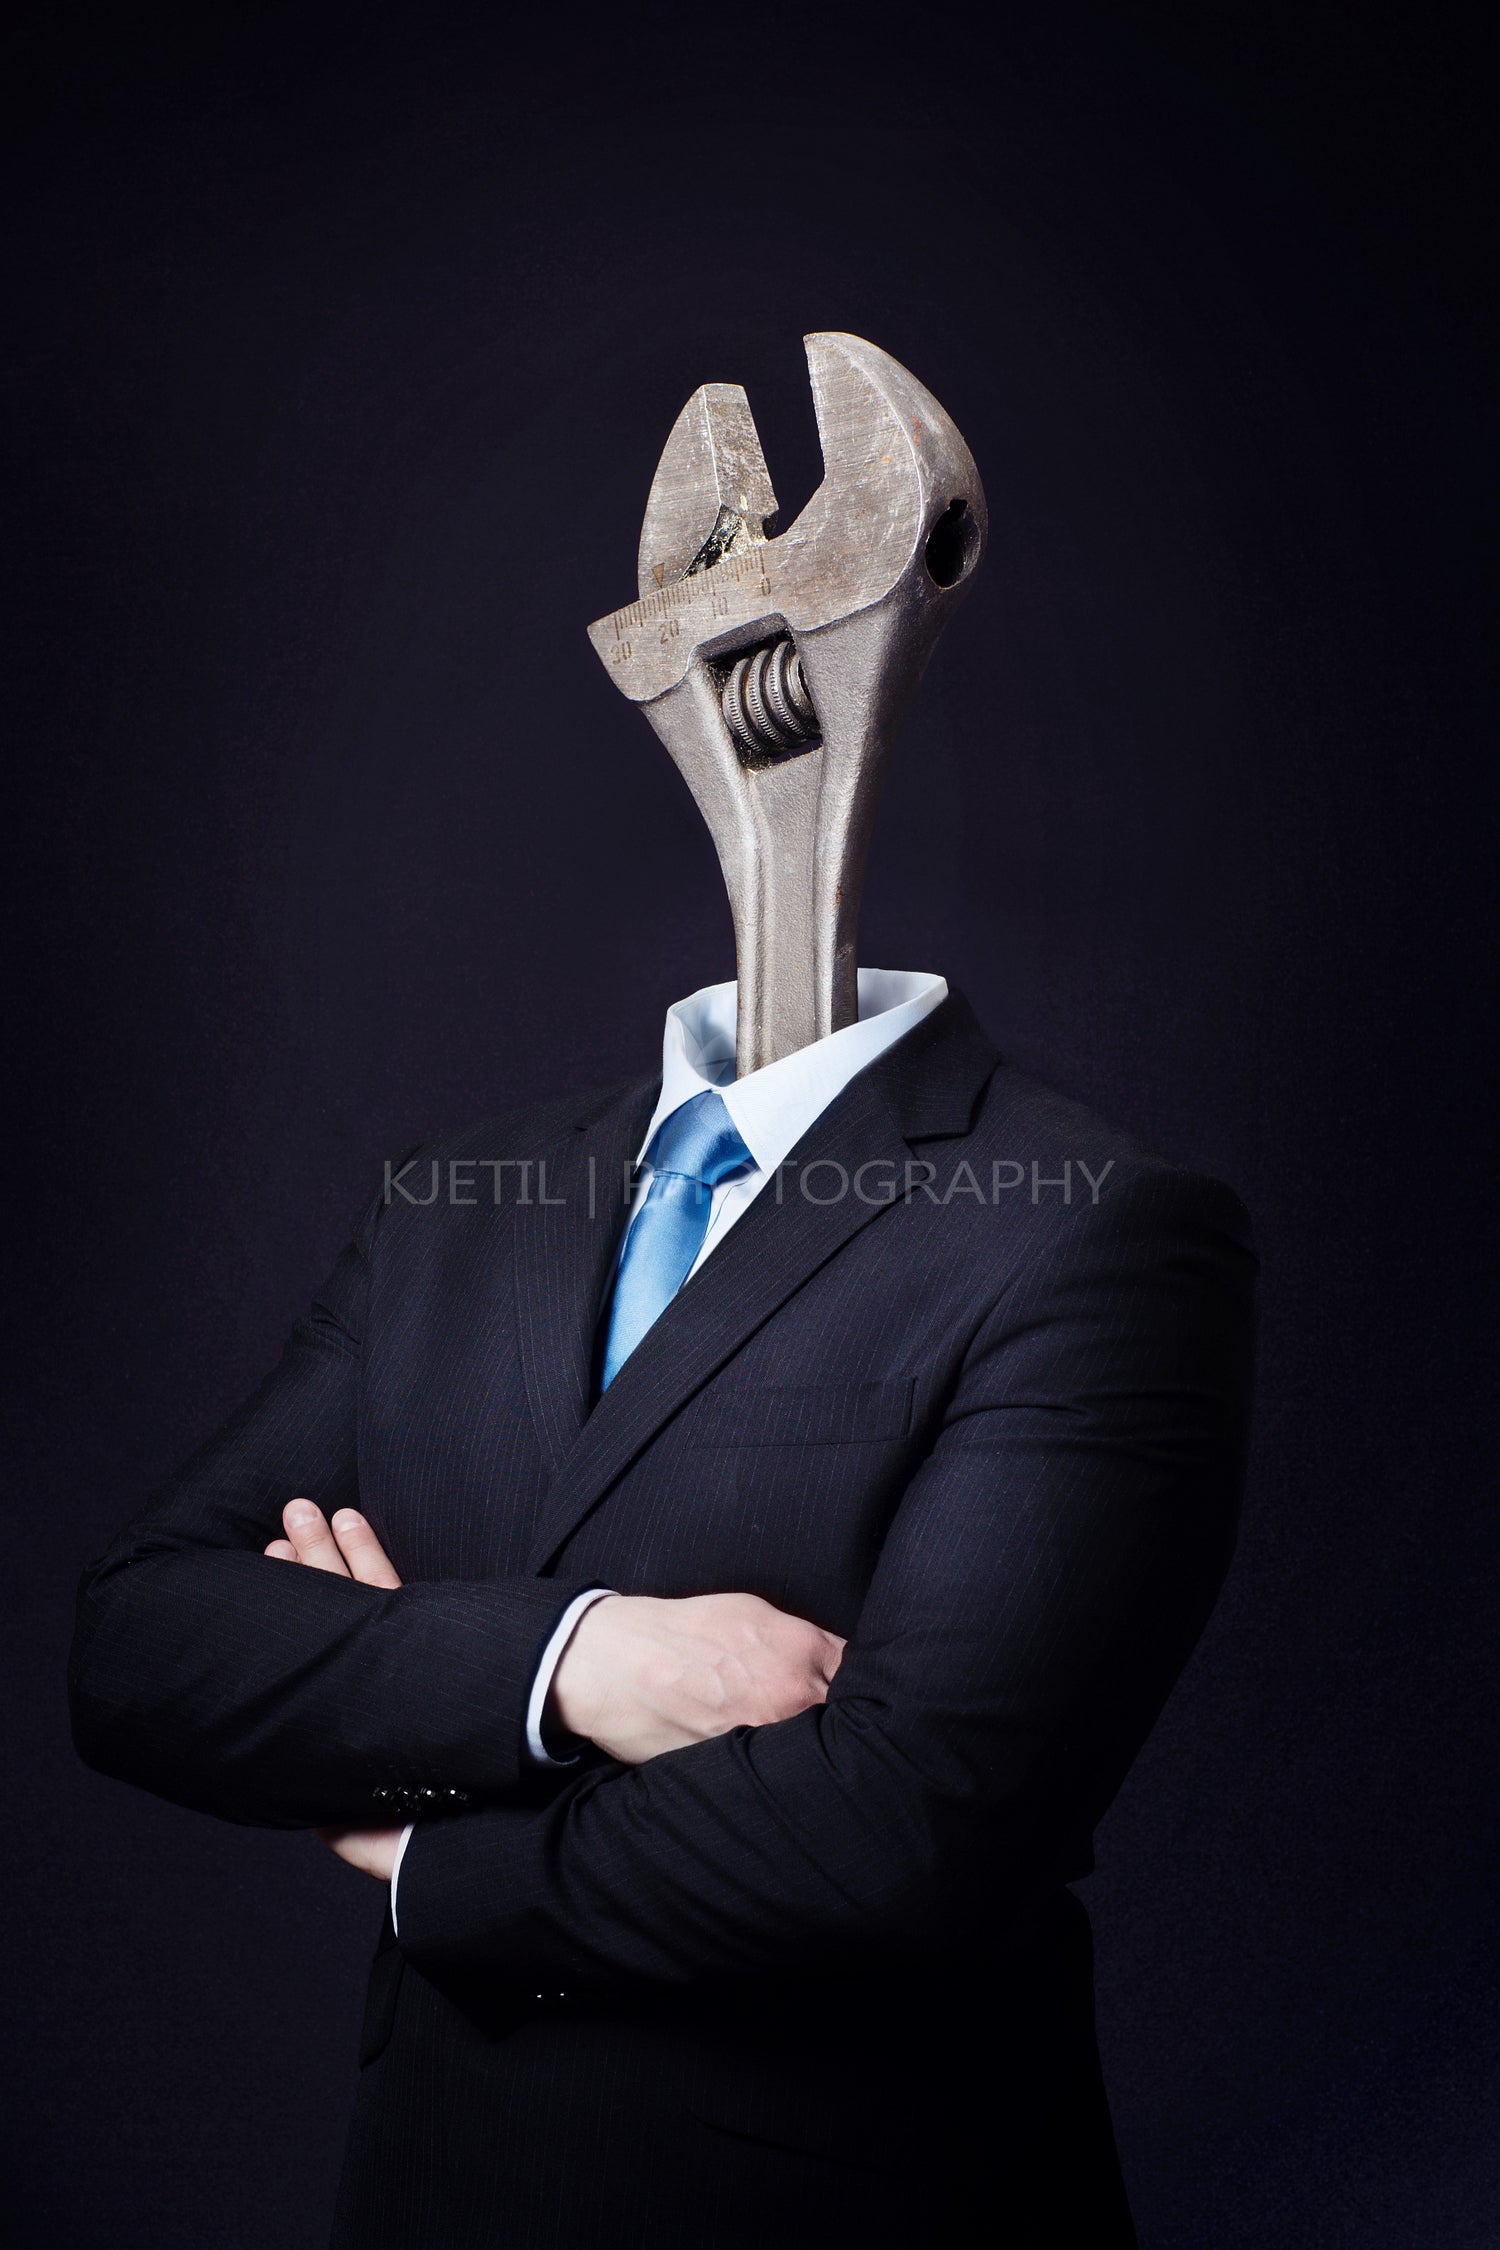 Man with Wrench Head